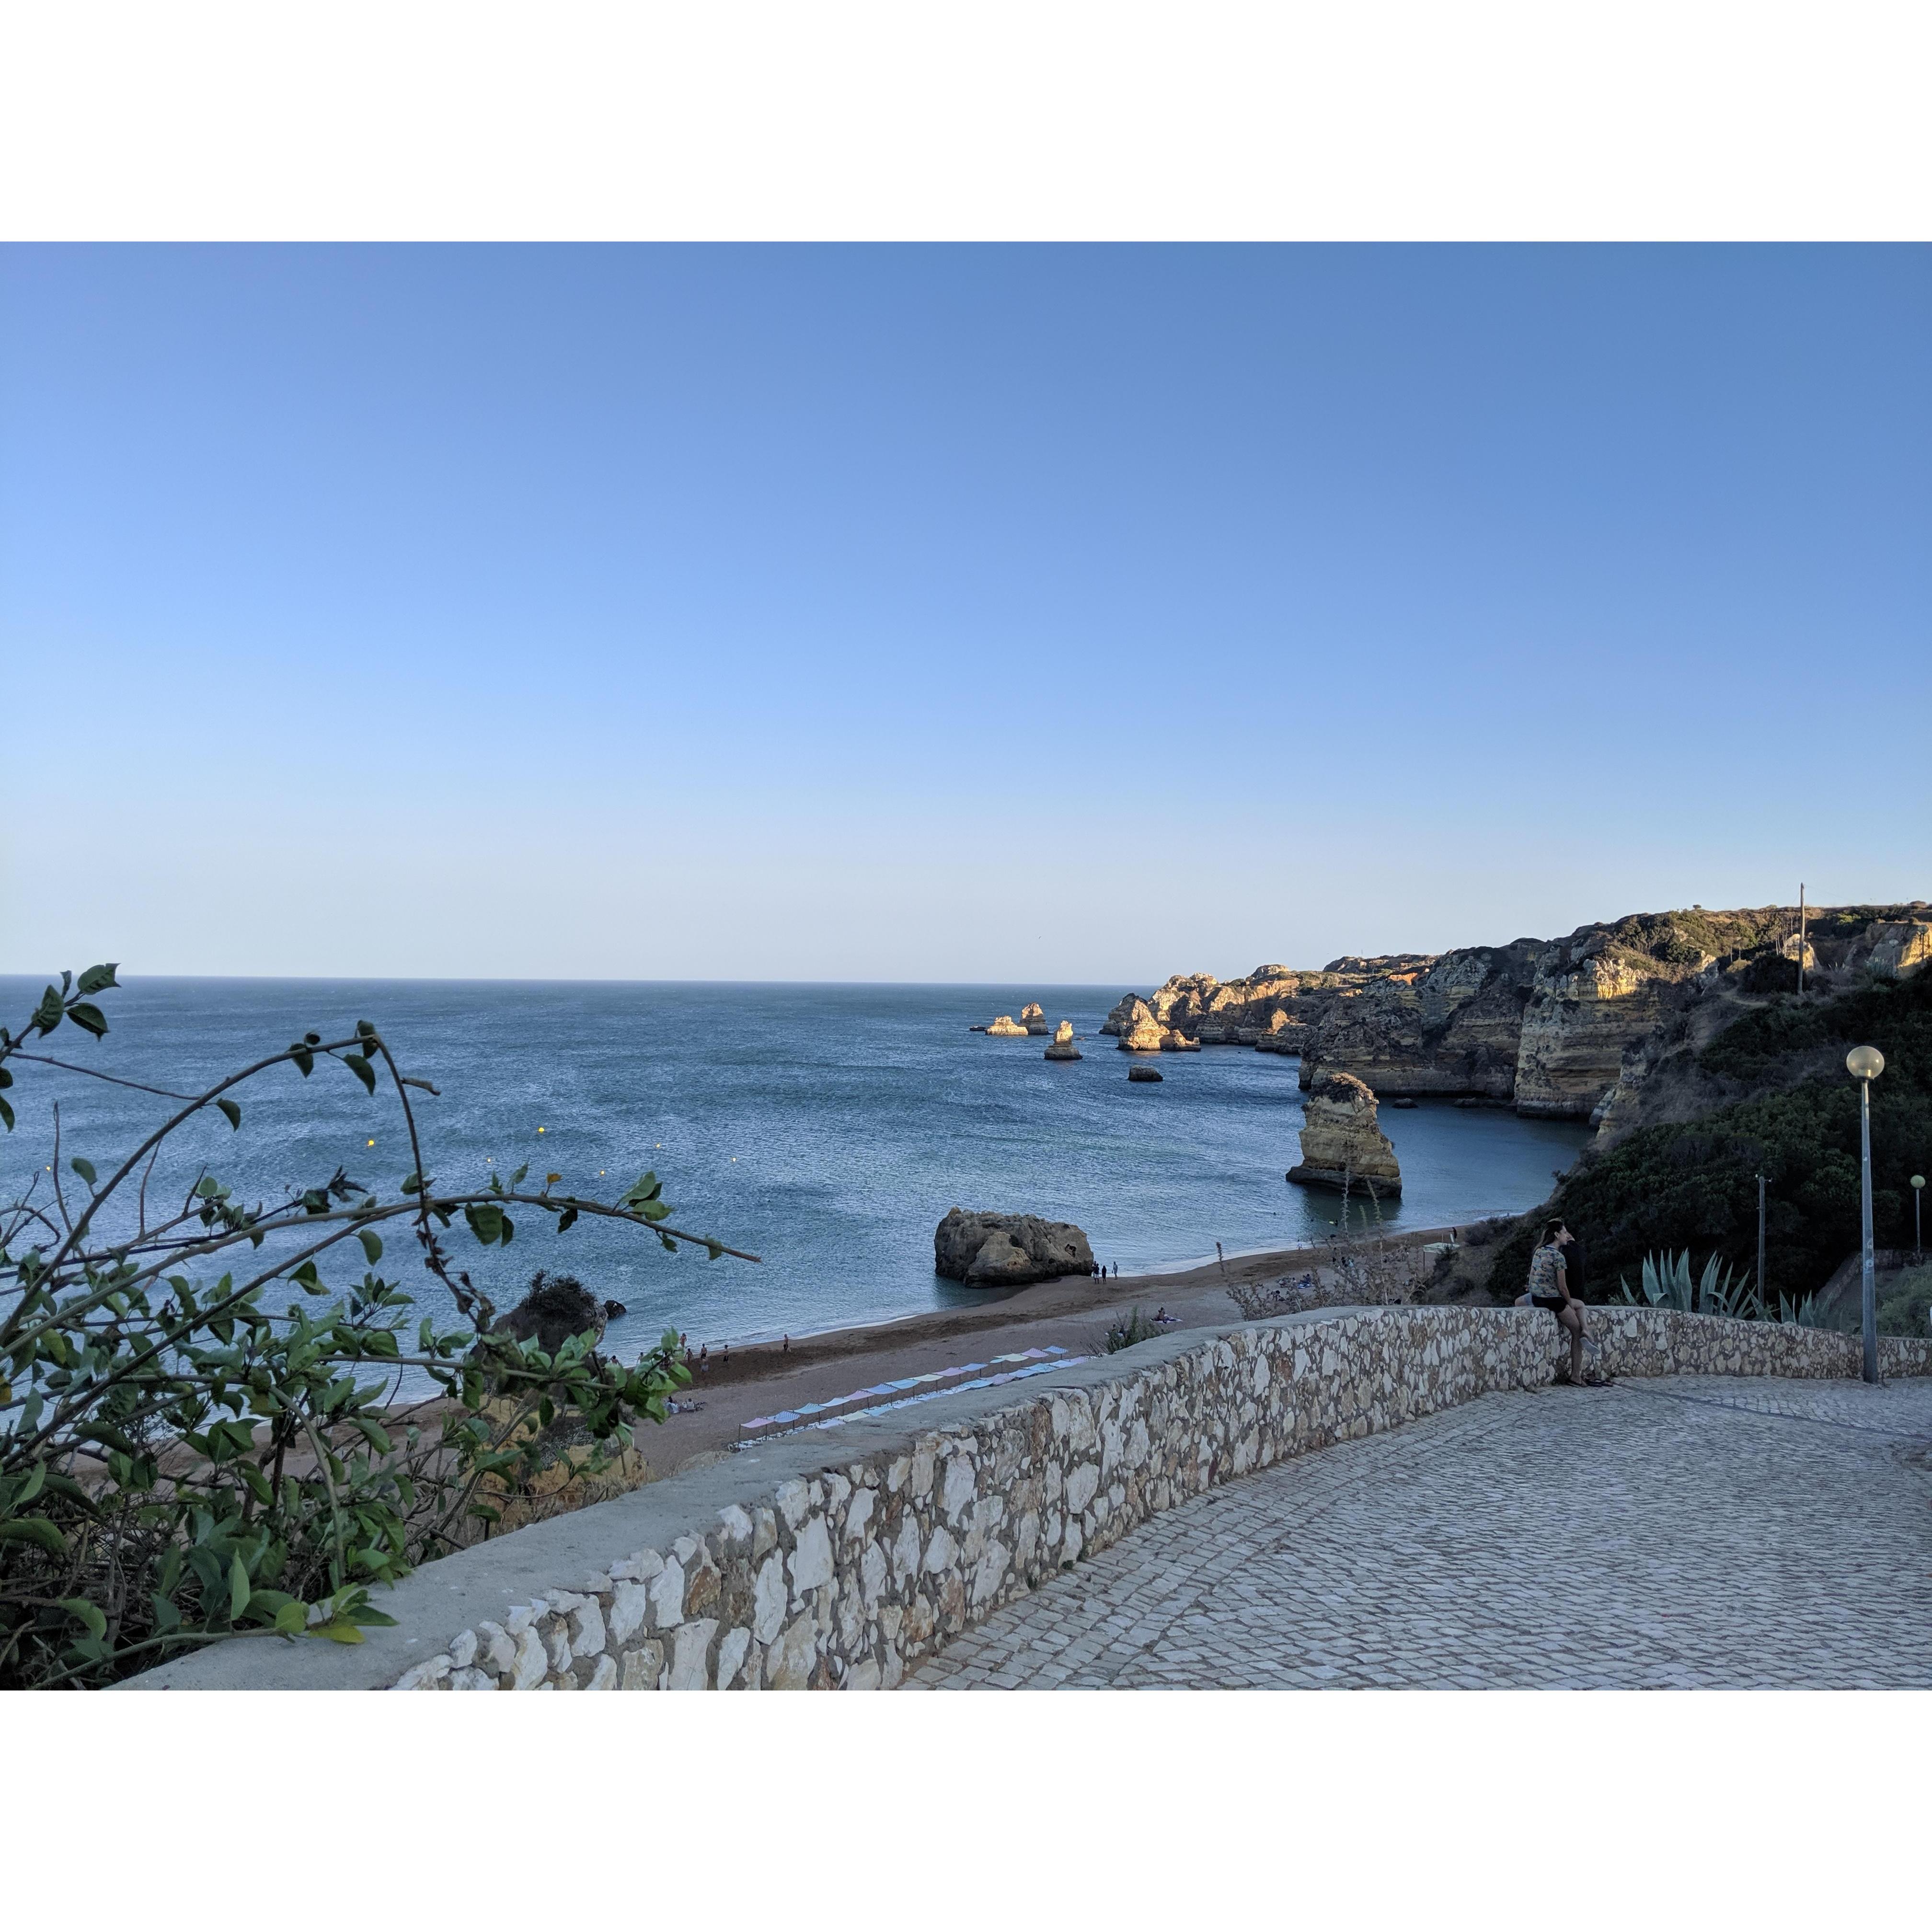 An evening walk to town in Lagos, Portugal